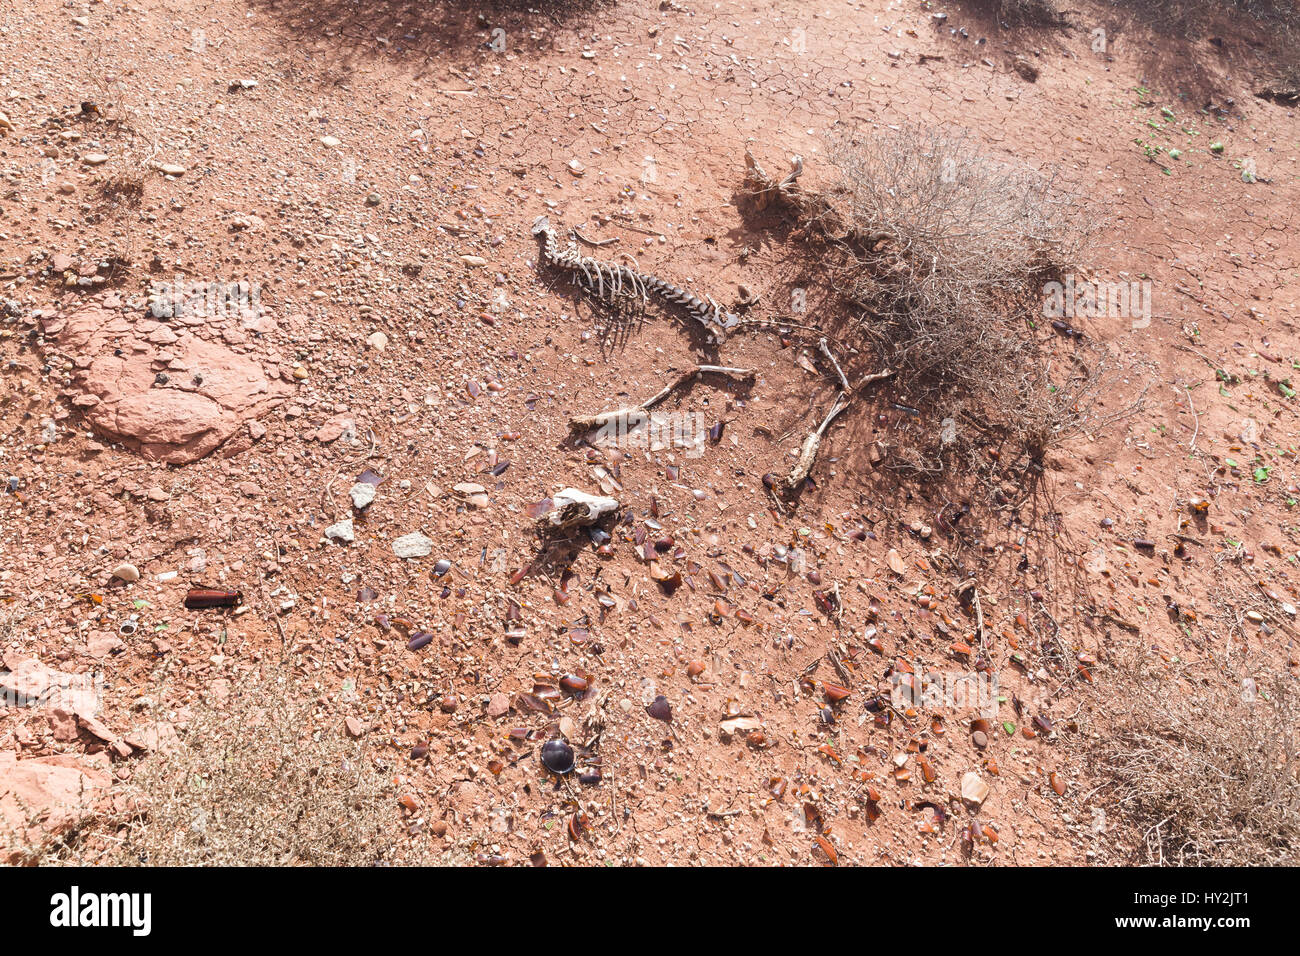 Red or brown dirt ground with bushes, litter, and the bones of a small animal. Stock Photo